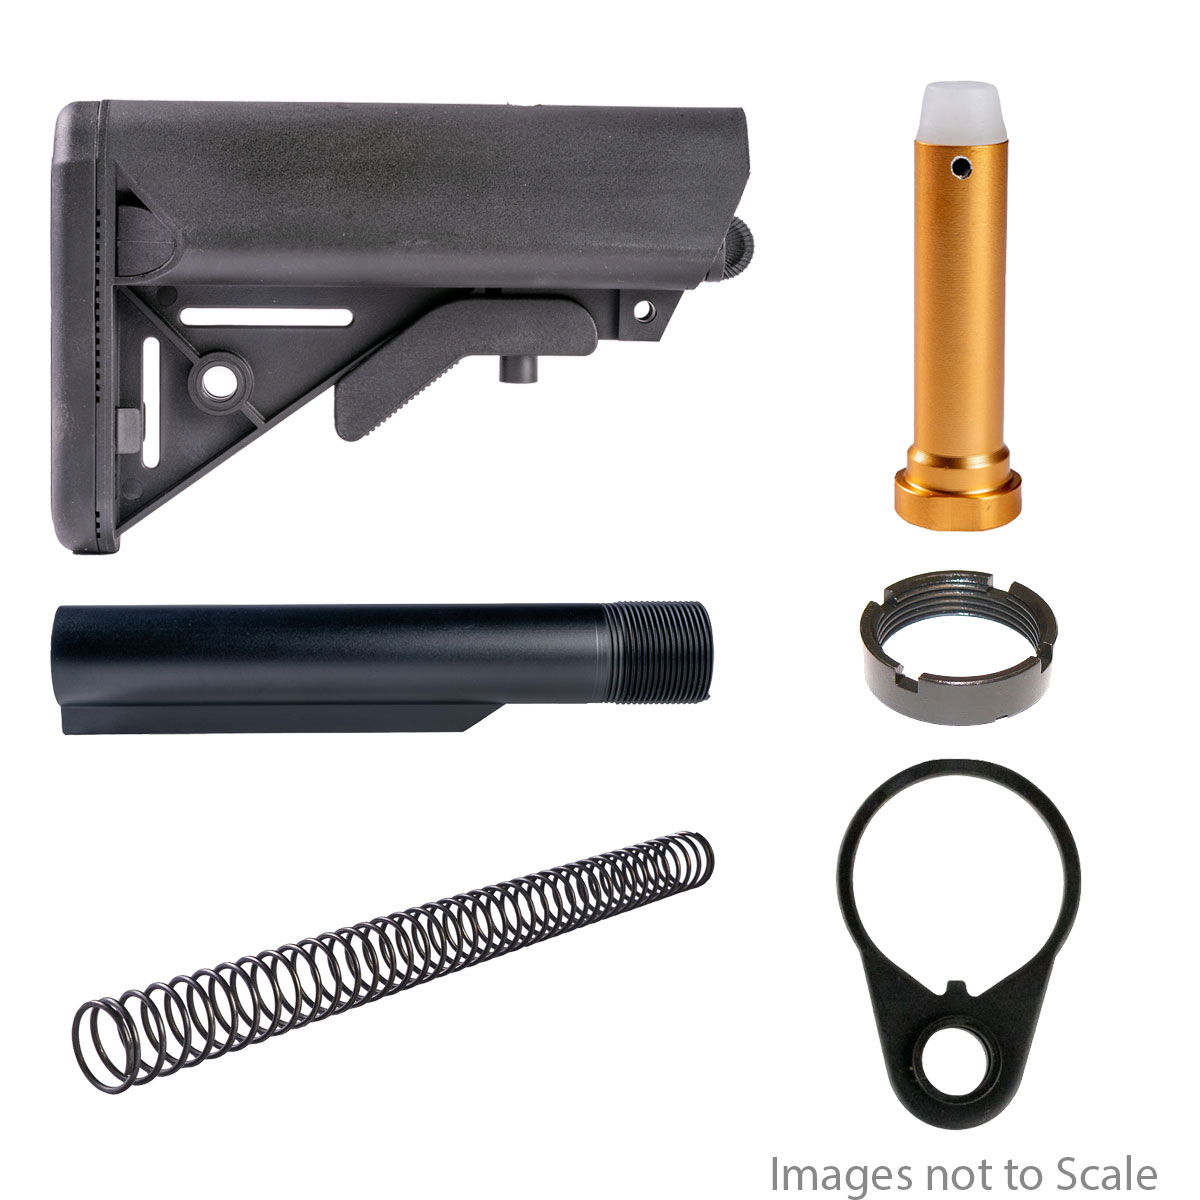 Buffer Tube Kits: Gauntlet Arms SOPMOD Style Collapsible Stock with Storage Compartments